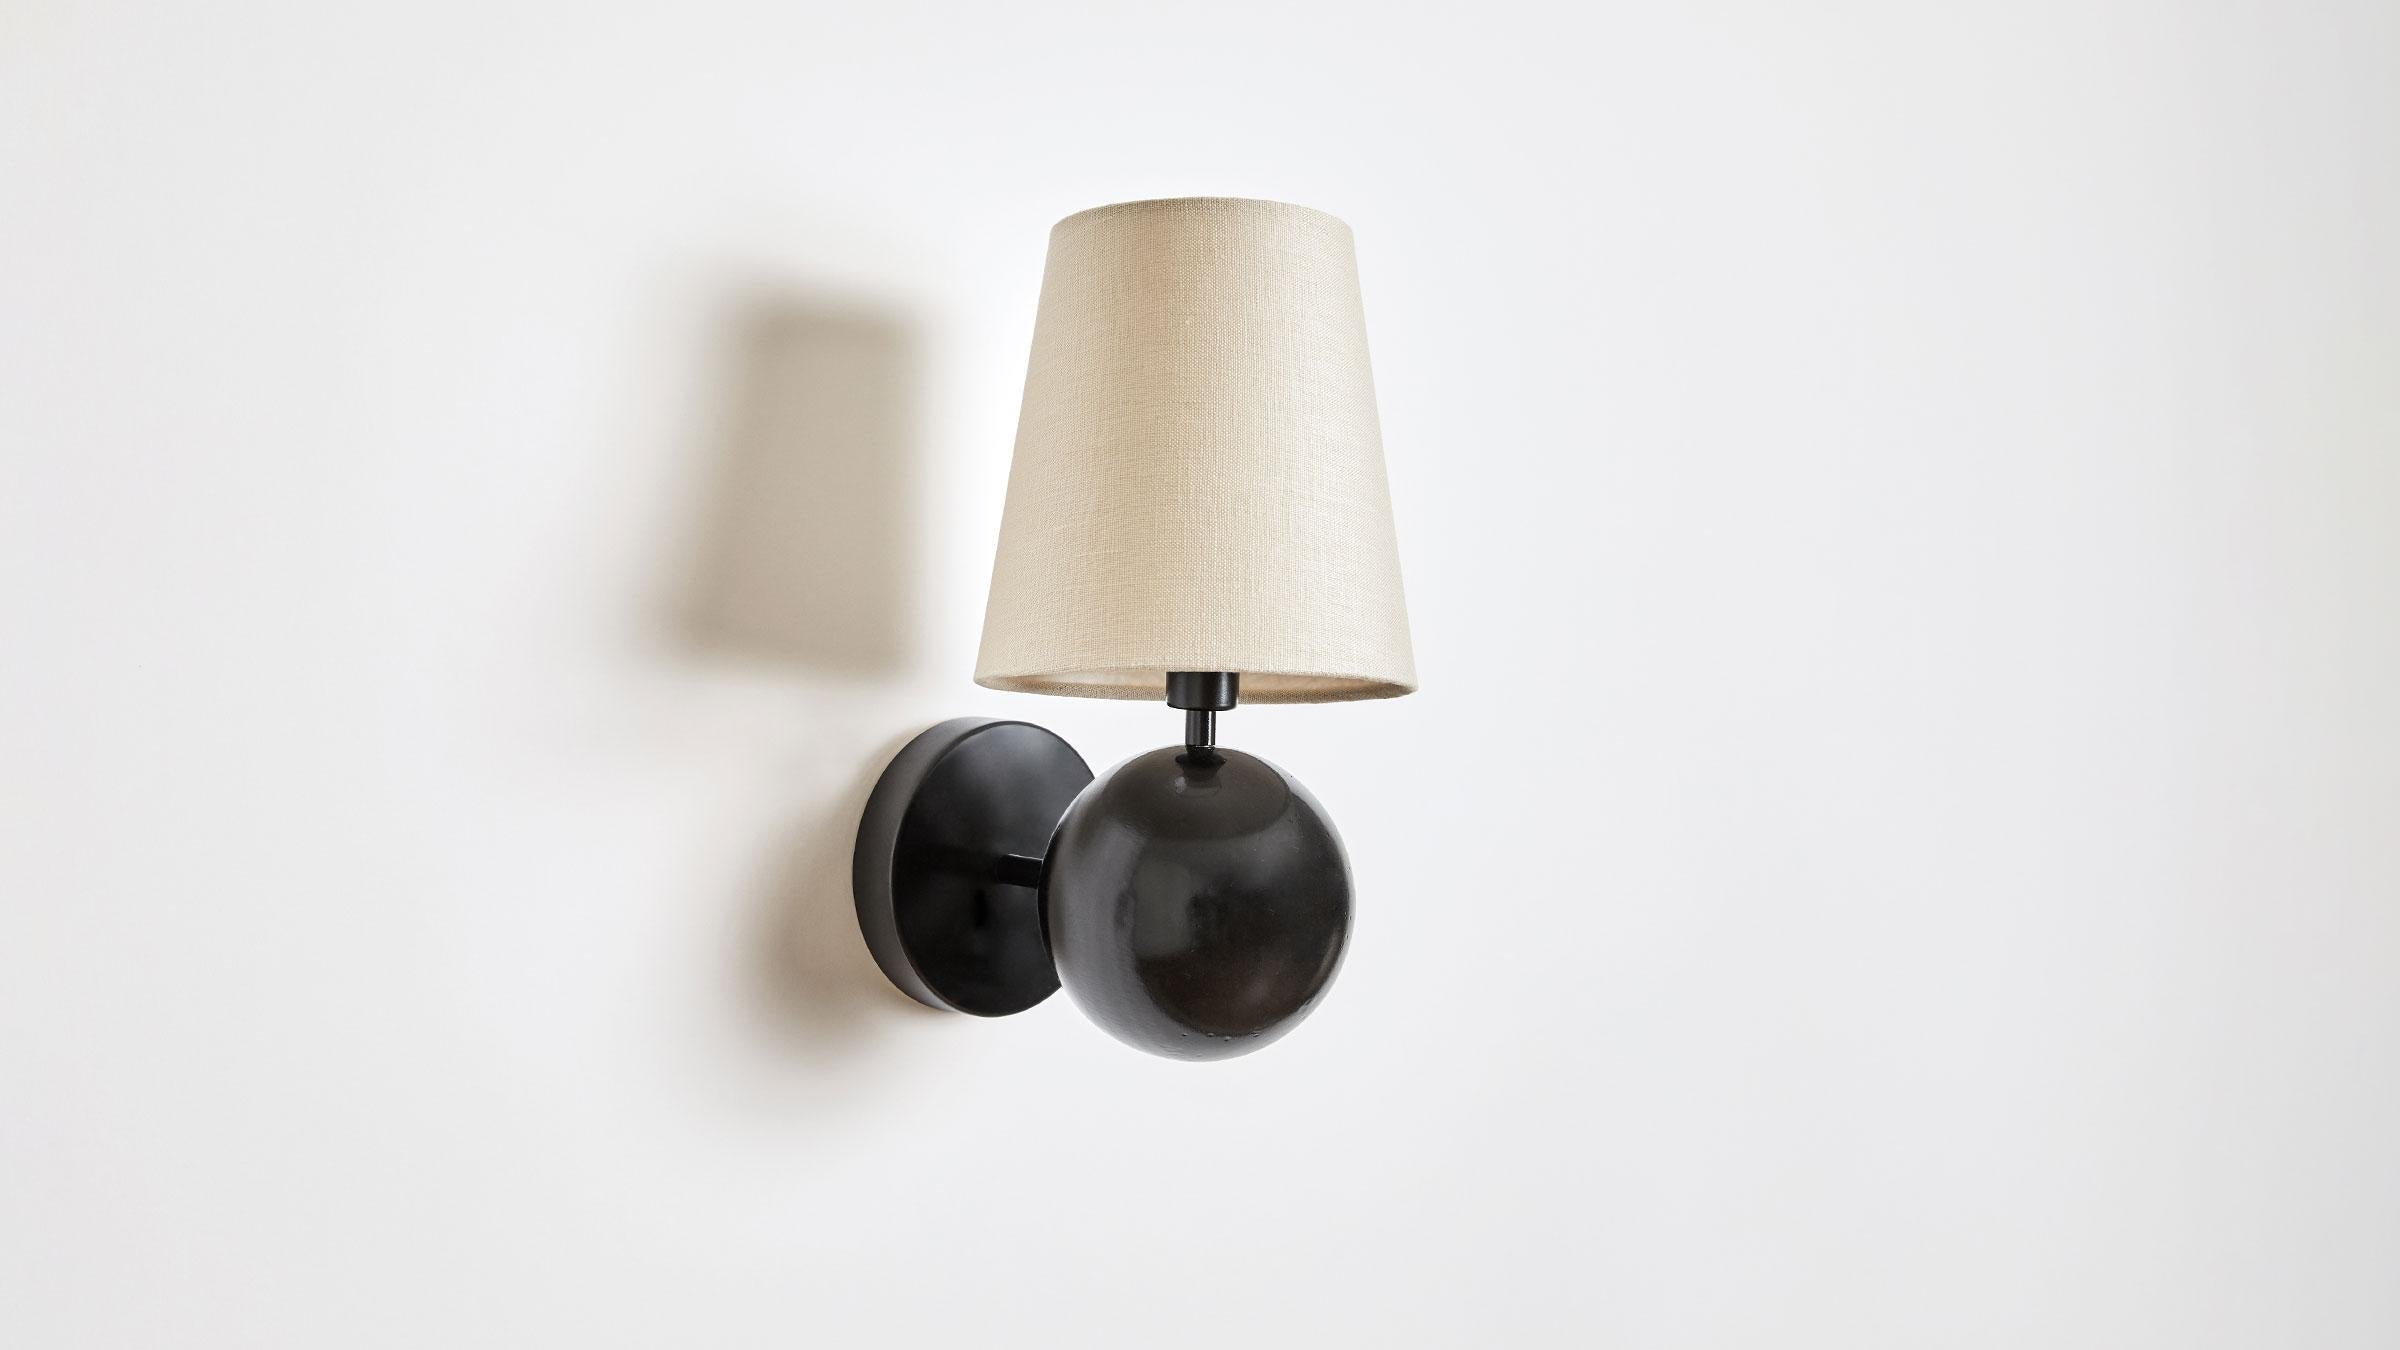 Bole positions a rotund form beneath a fabric shade, presenting a grounded yet buoyant composition for the wall. Available in White or Black Enamel, each version provides the perfect punctuation in any room. Made in the USA. UL Listed. Damp rated